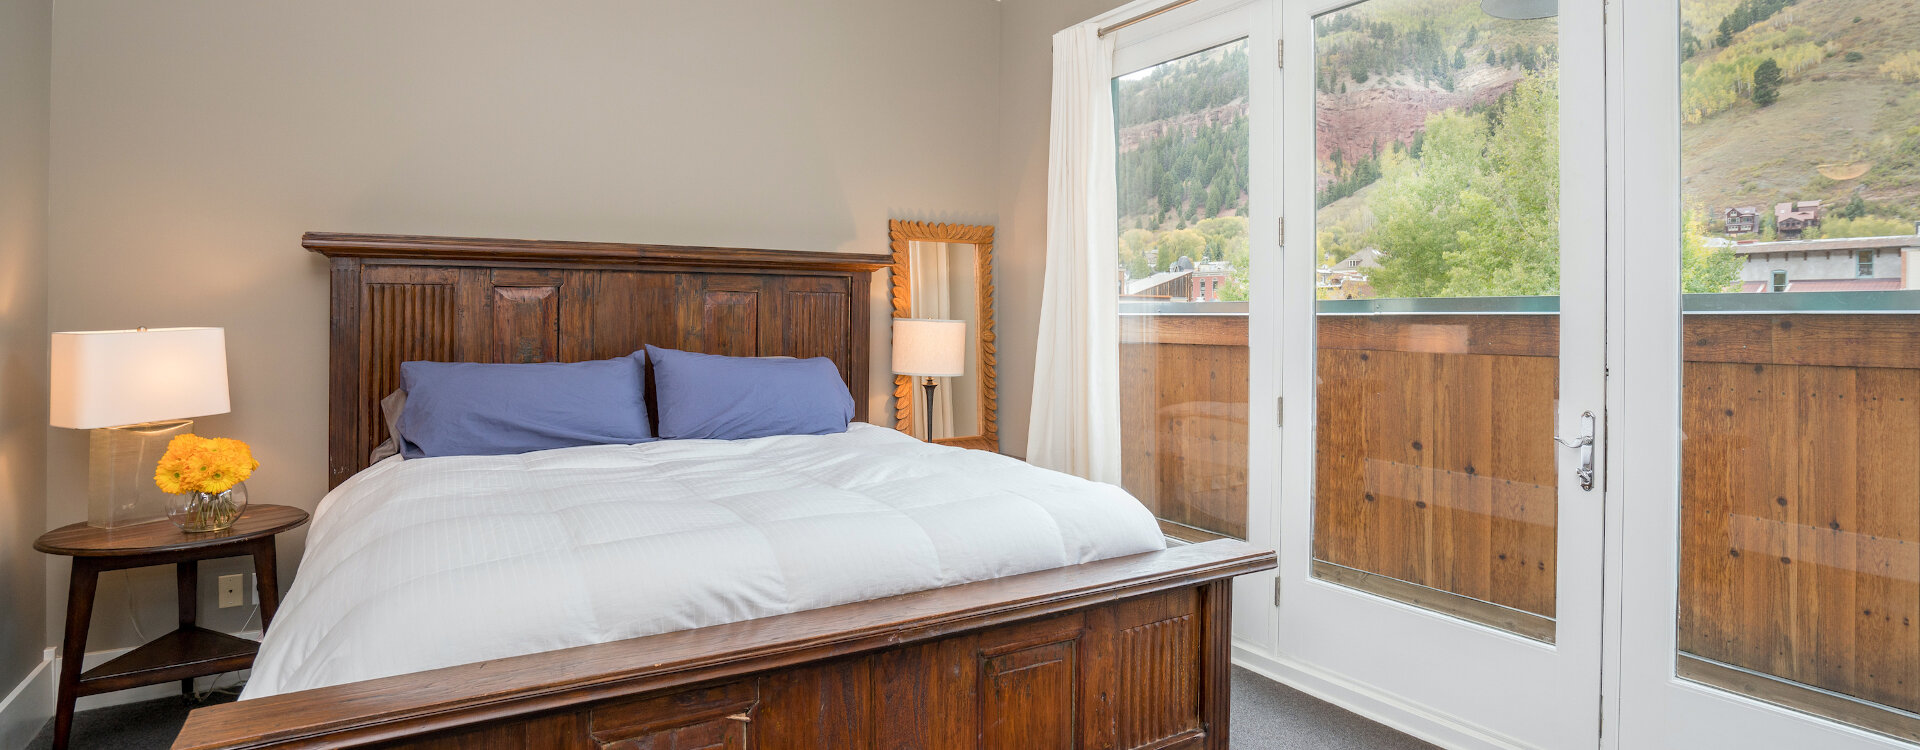 5-Telluride-Pacific-Place-Master-Bedroom-Web